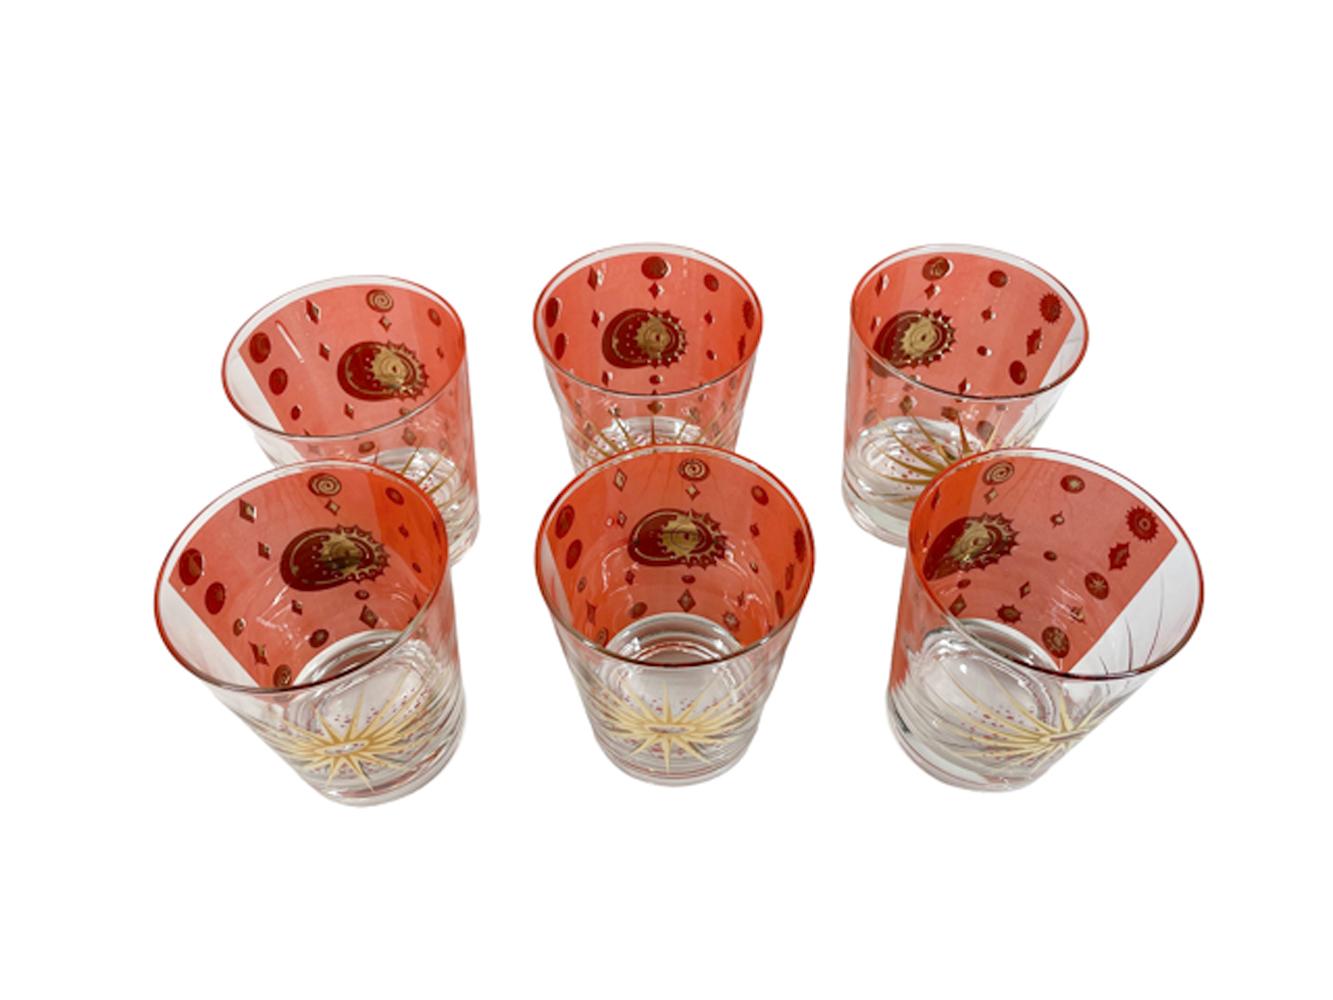 Six Fred Press Atomic era double old fashioned glasses in the 